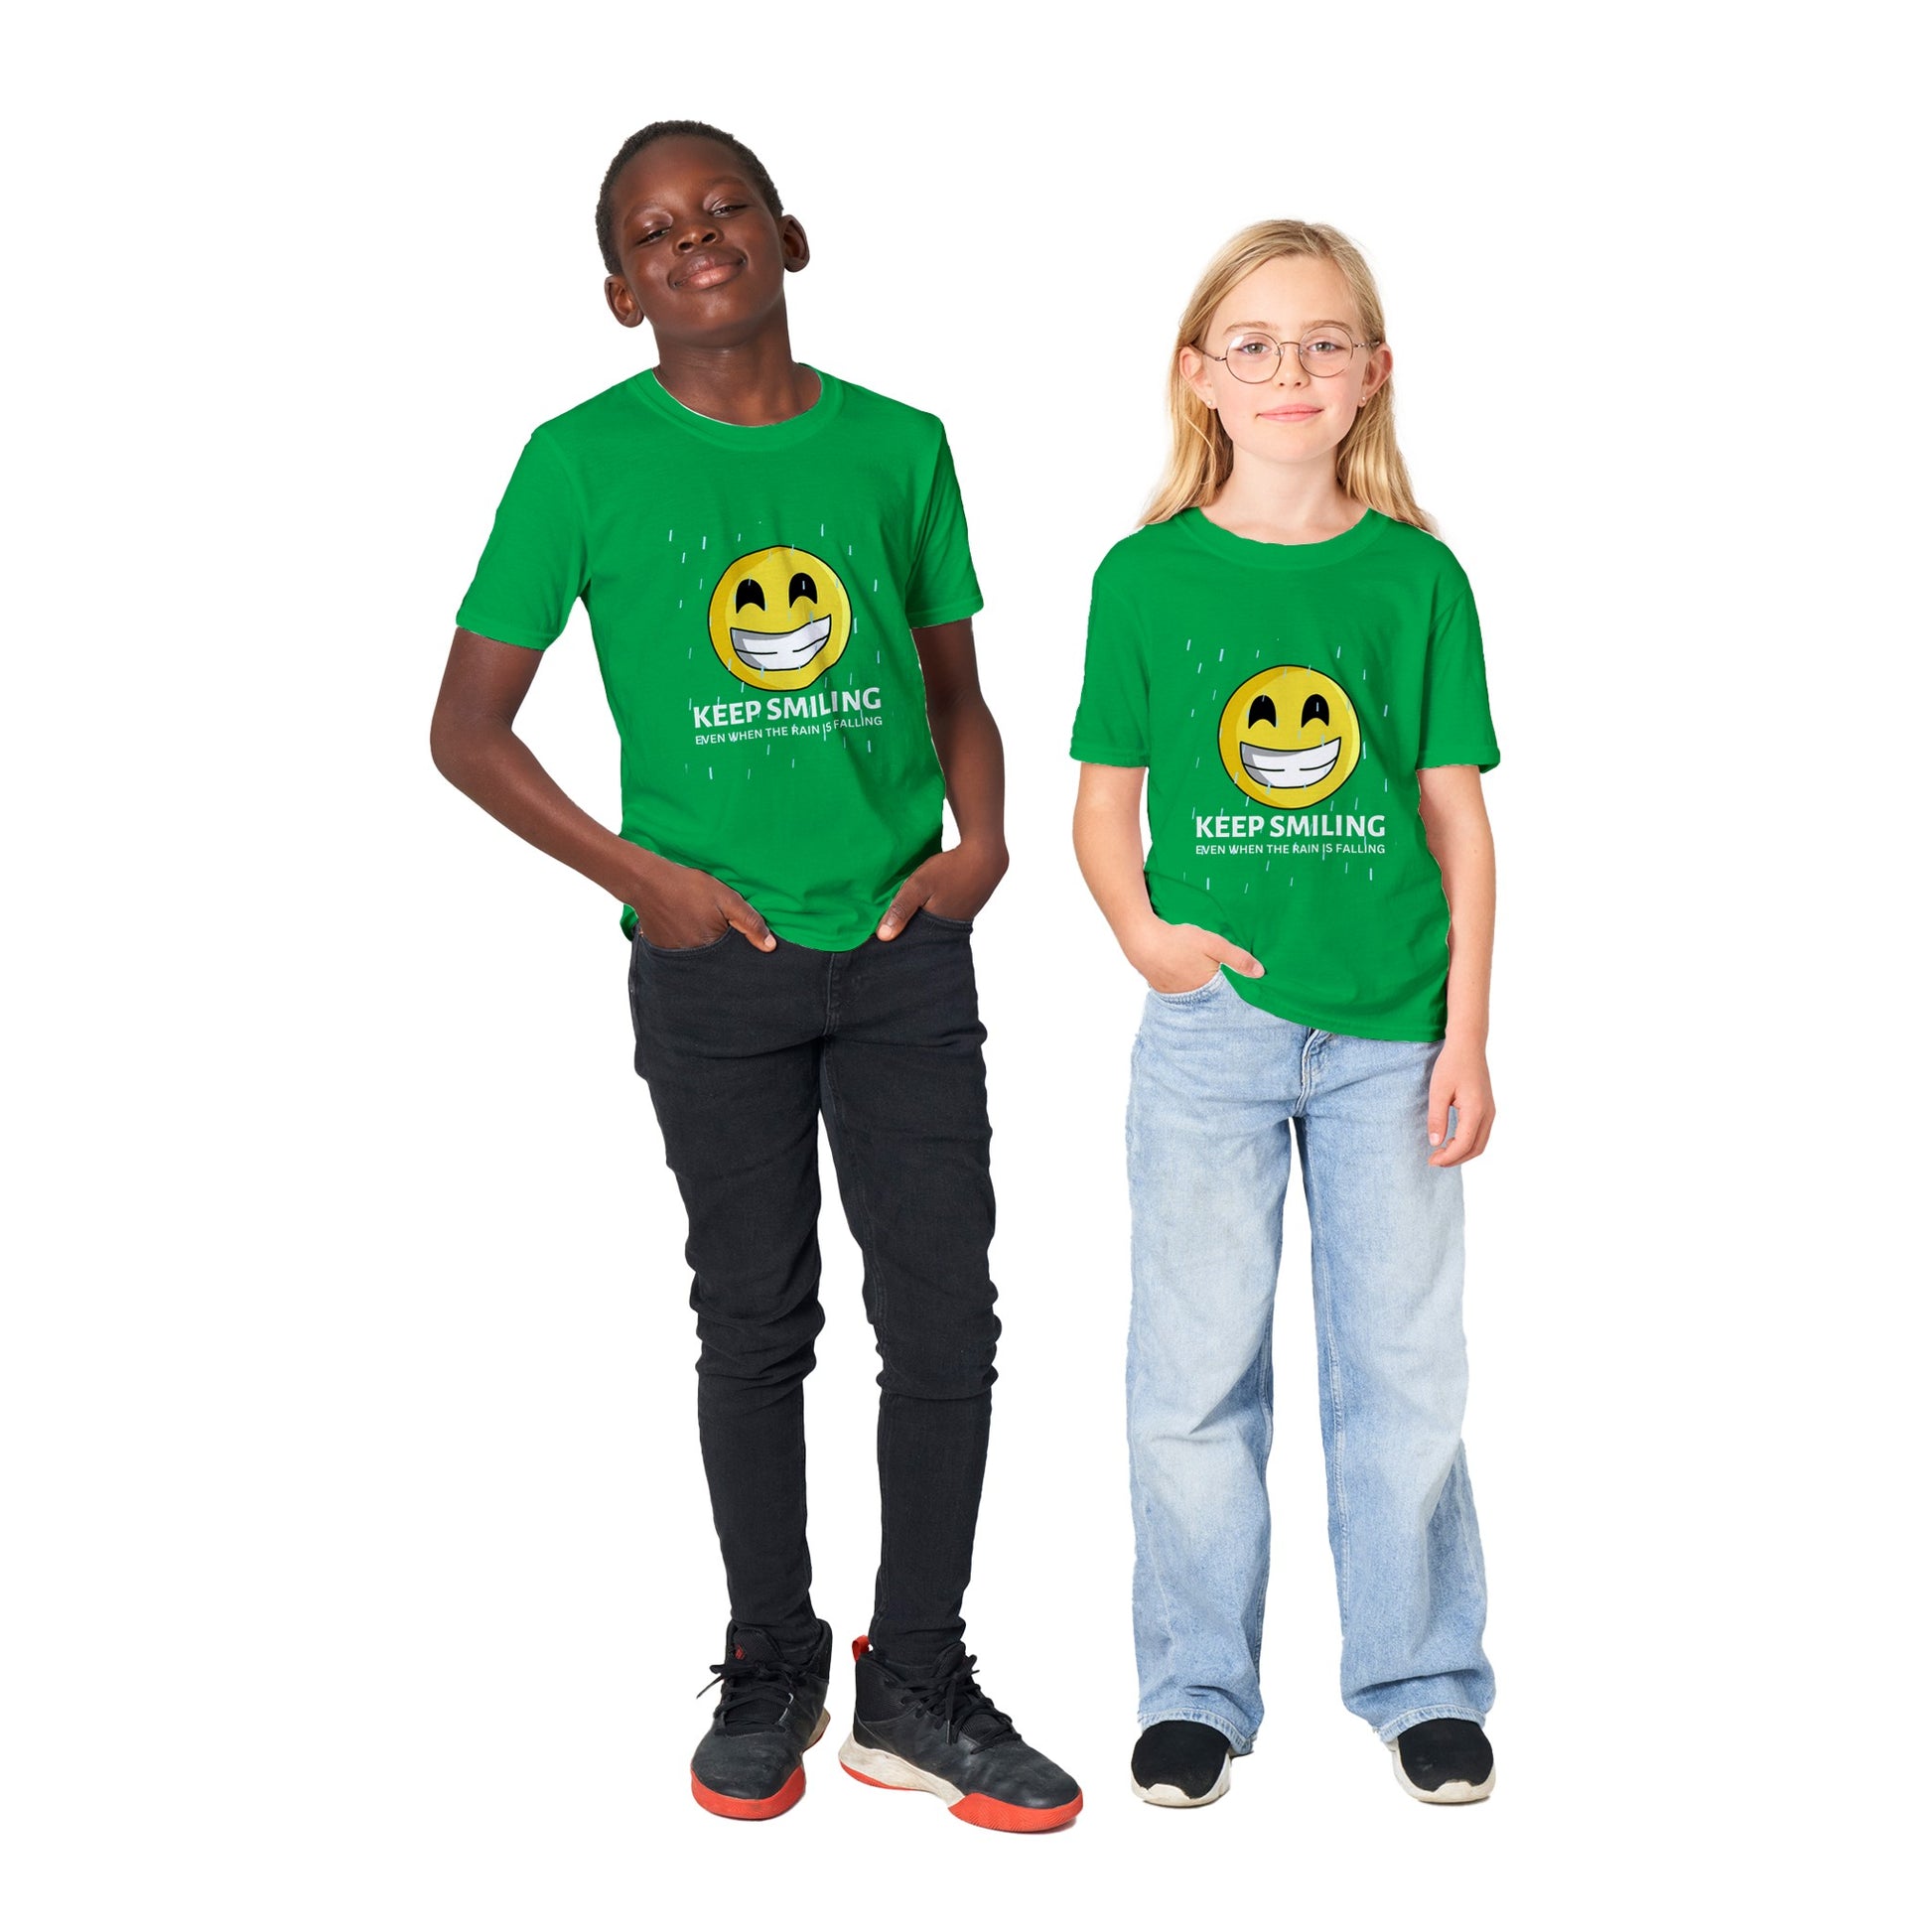 Inspirational Kids T-Shirt with a positive affirmation: "I Keep Smiling, even when the rain is falling". An image of an emoji smiling and drop of rain - green